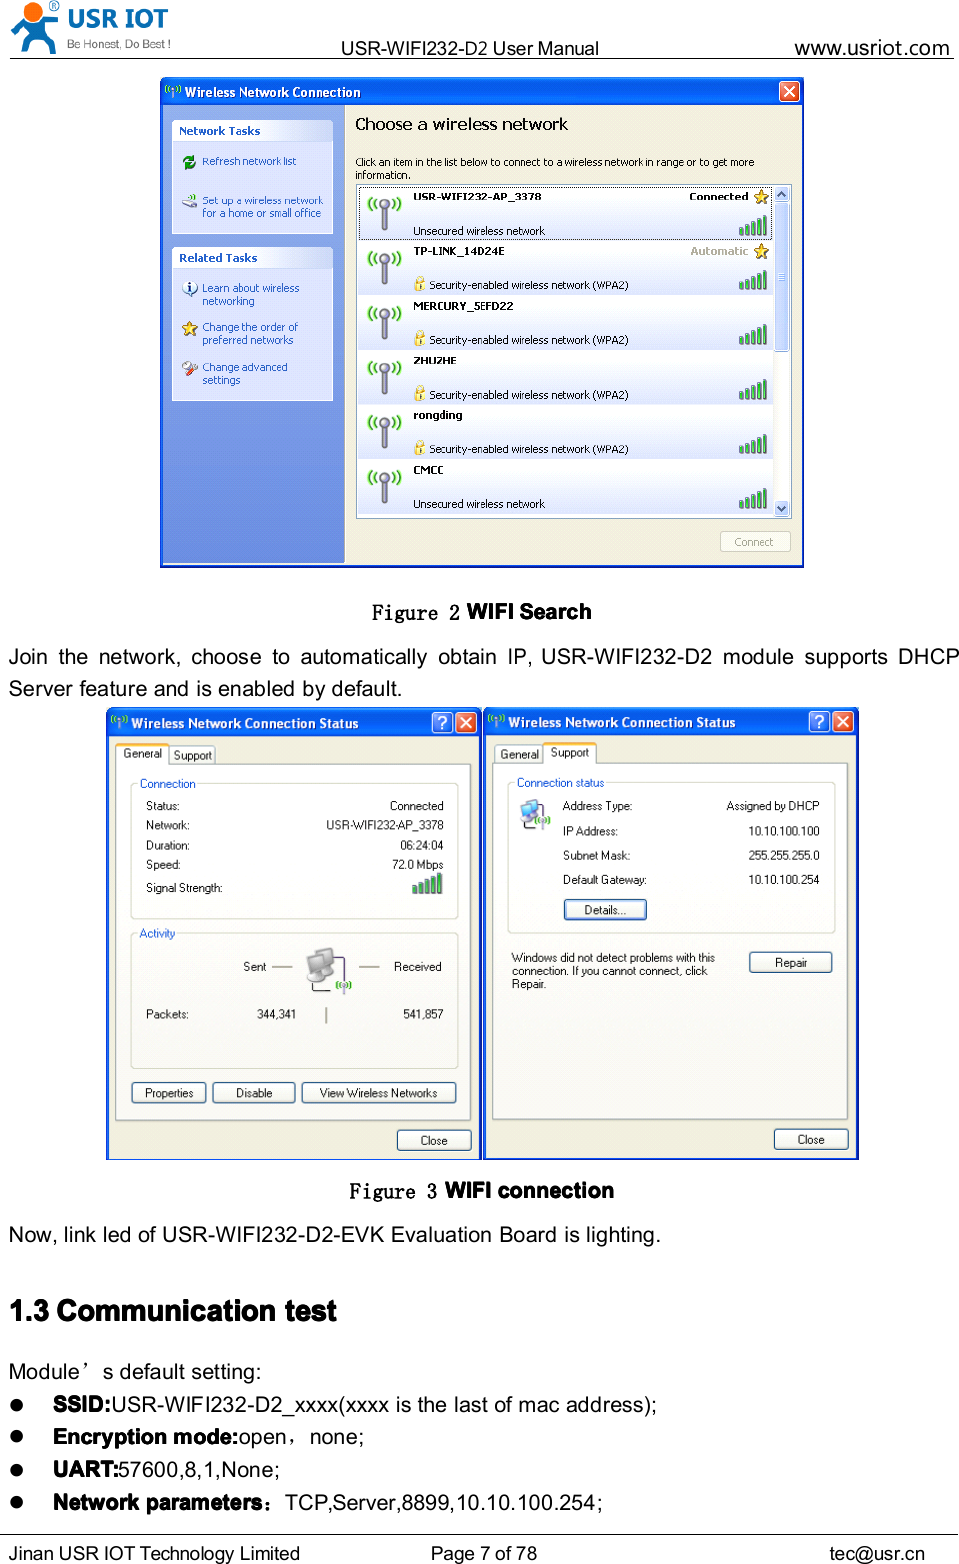 USR-WIFI232- D2 User Manual www.usr iot .comJinan USR IOT Technology Limited Page 7 of 78 tec@usr.cnFigure 2 WIFIWIFIWIFIWIFI SearchSearchSearchSearchJoin the network, choose to automatically obtainIP,USR-WIFI232-D2 module supports DHCPServer feature and is enabled by default.Figure 3 WIFIWIFIWIFIWIFI connectionconnectionconnectionconnectionNow, link led of USR-WIFI232- D2-EVK Evaluation Board is lighting.1.31.31.31.3 CCCC ommunicationommunicationommunicationommunication testtesttesttestModule ’s default setting:SSID:SSID:SSID:SSID: USR-WIFI232-D2_xxxx(xxxx is the last of mac address);EncryptionEncryptionEncryptionEncryption modemodemodemode ::::open ，none ;UART:UART:UART:UART: 57600 ,8,1,None ;NetworkNetworkNetworkNetwork parametersparametersparametersparameters ：TCP,Server,8899,10.10.100.254 ;